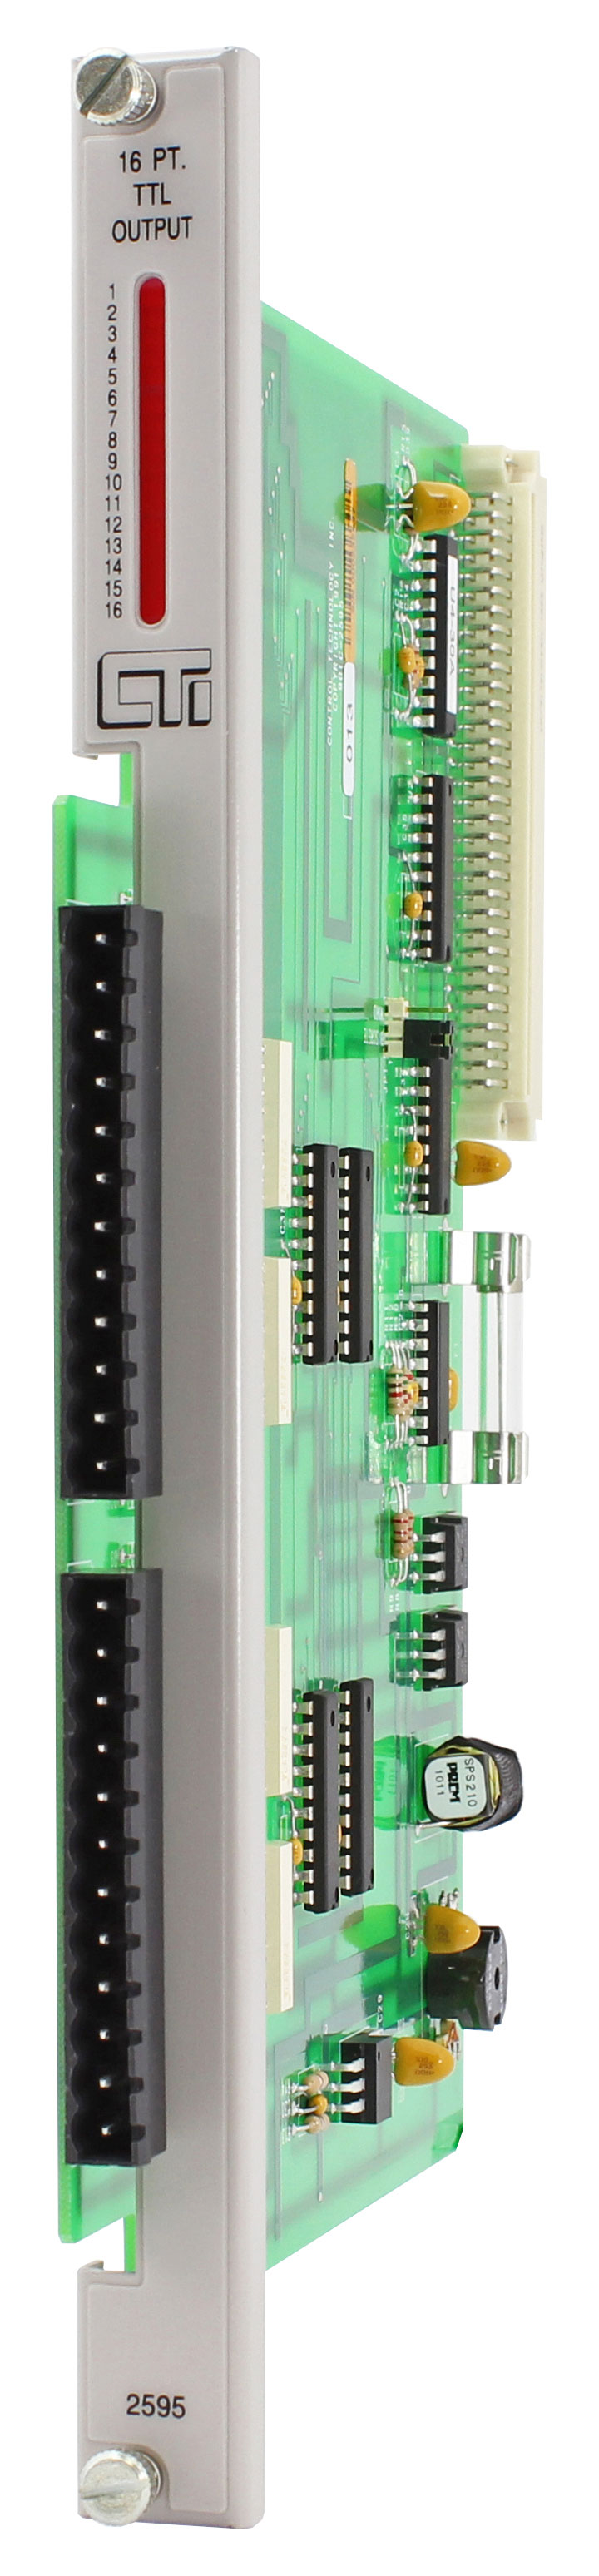 2595 16-Point TTL/Word Output Module